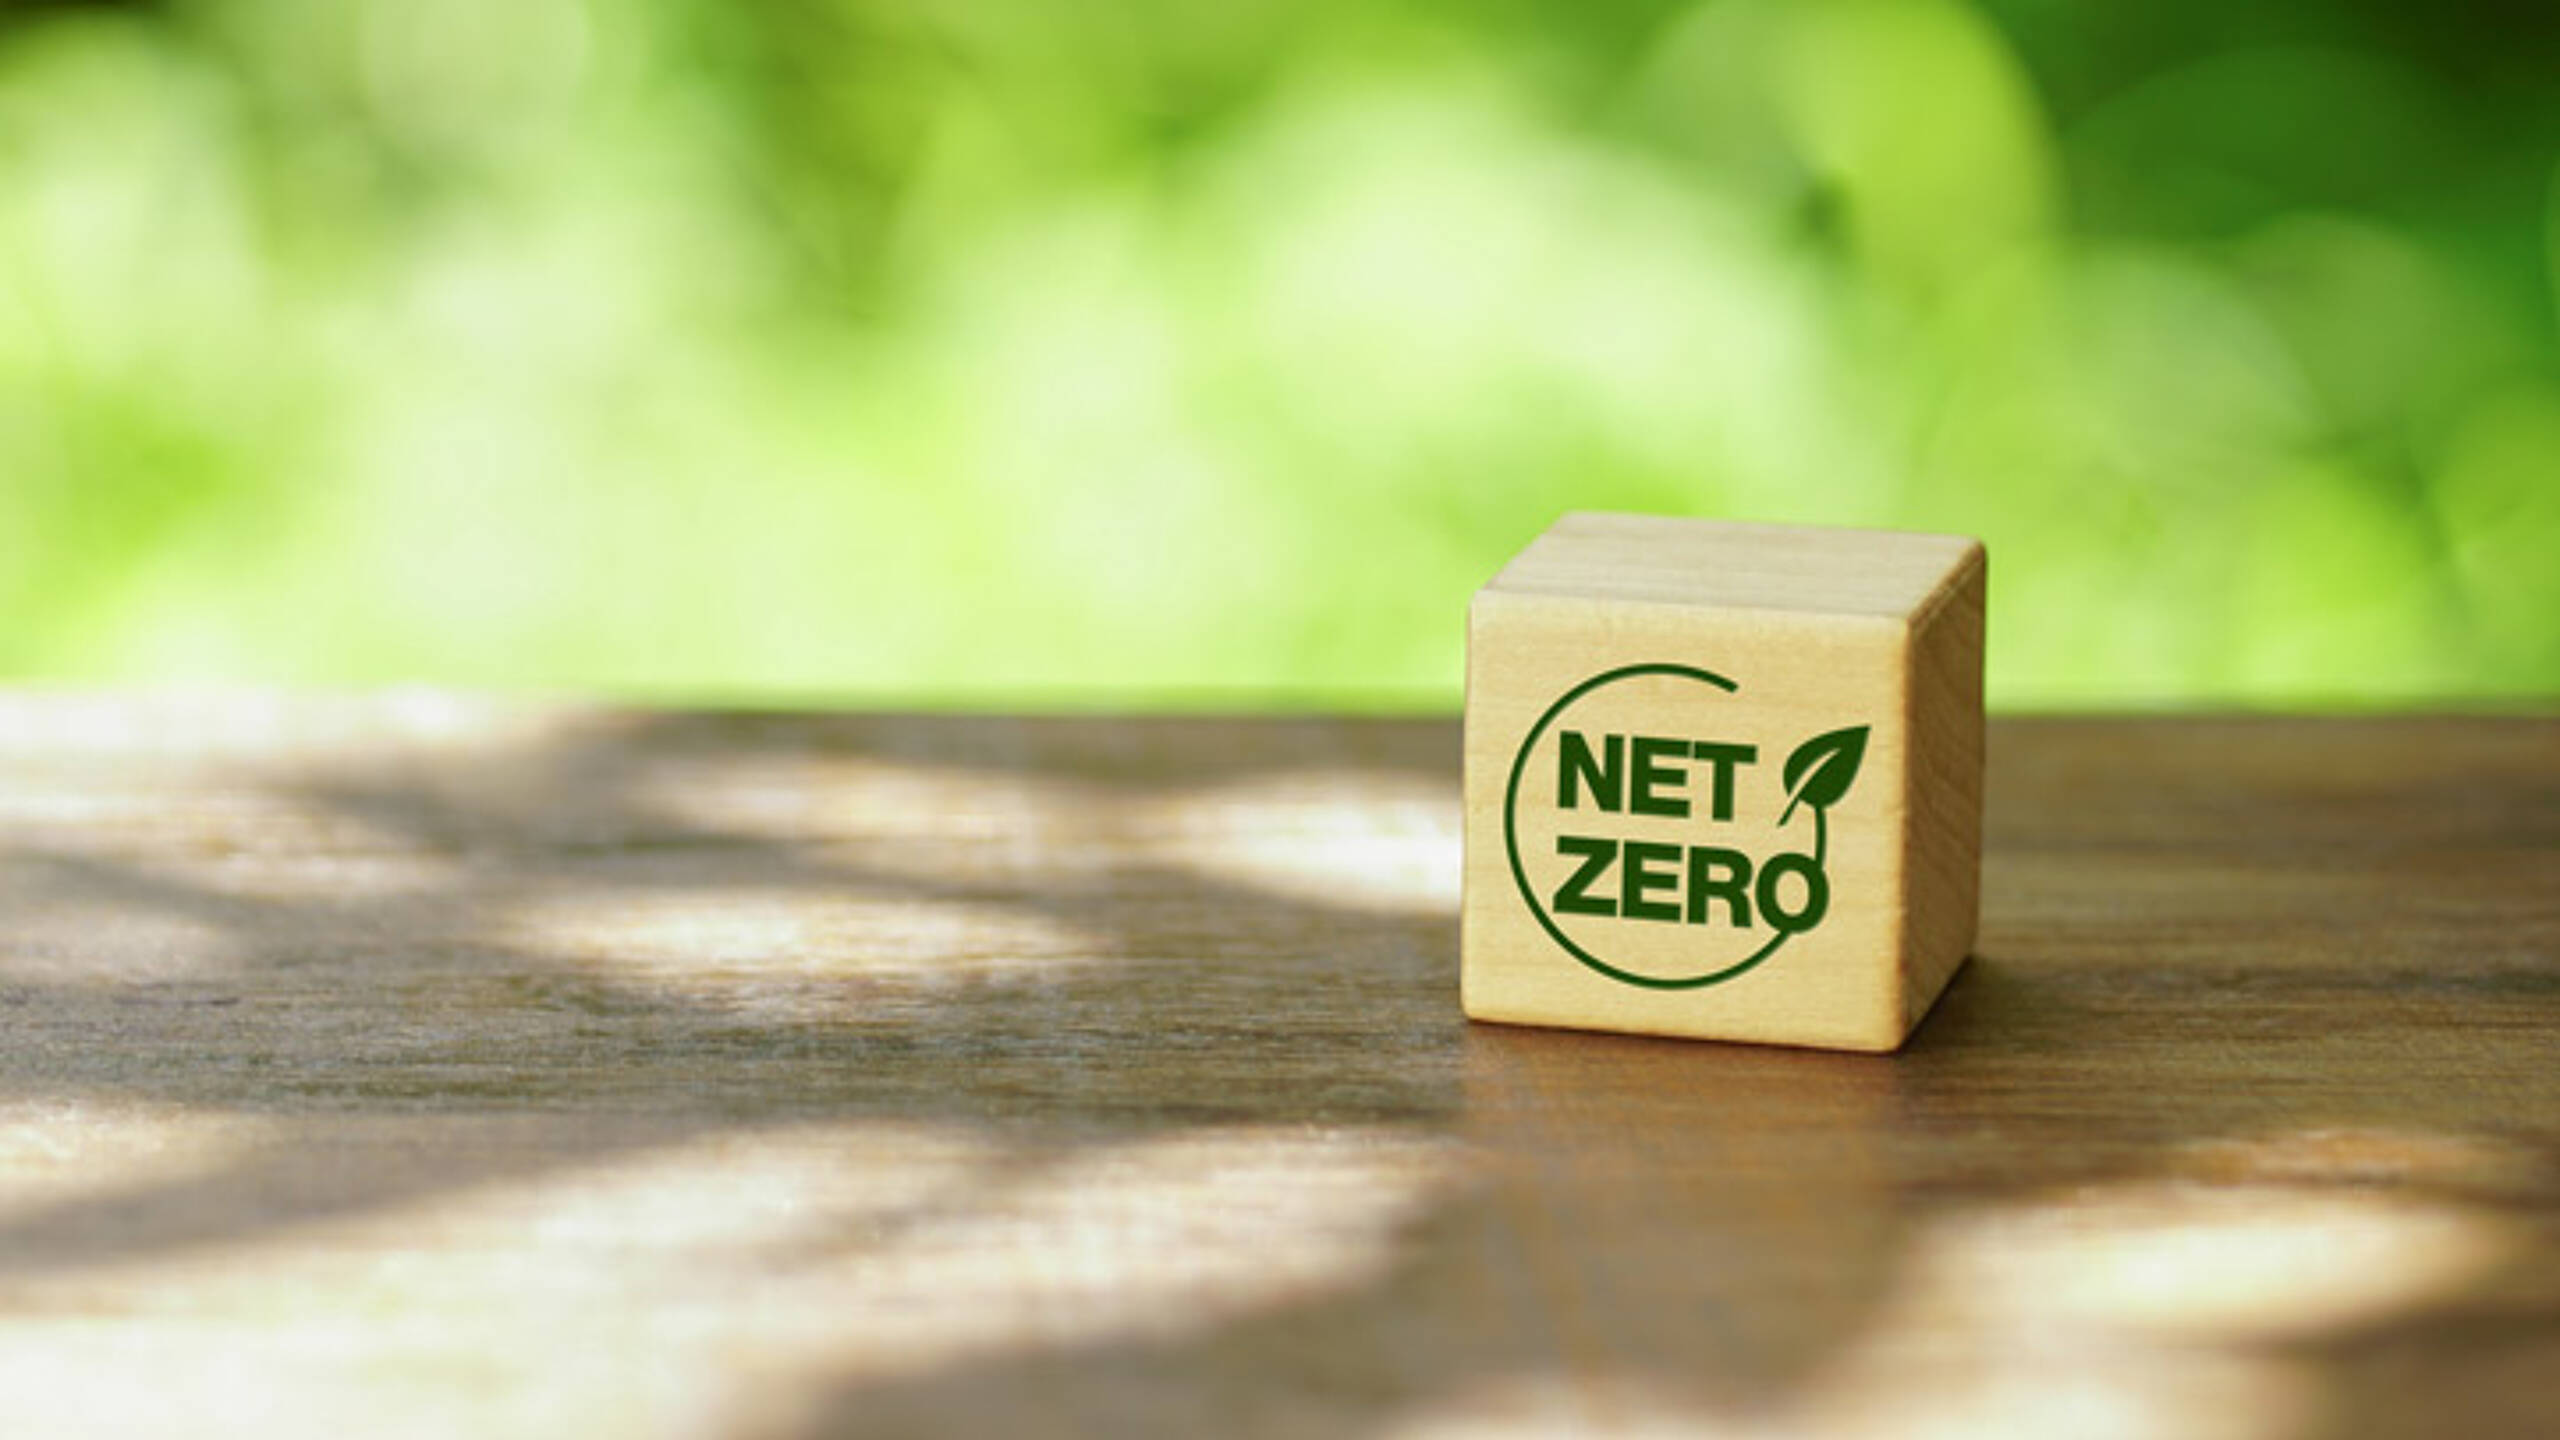 We Mean Business and B Lab partner on net-zero push